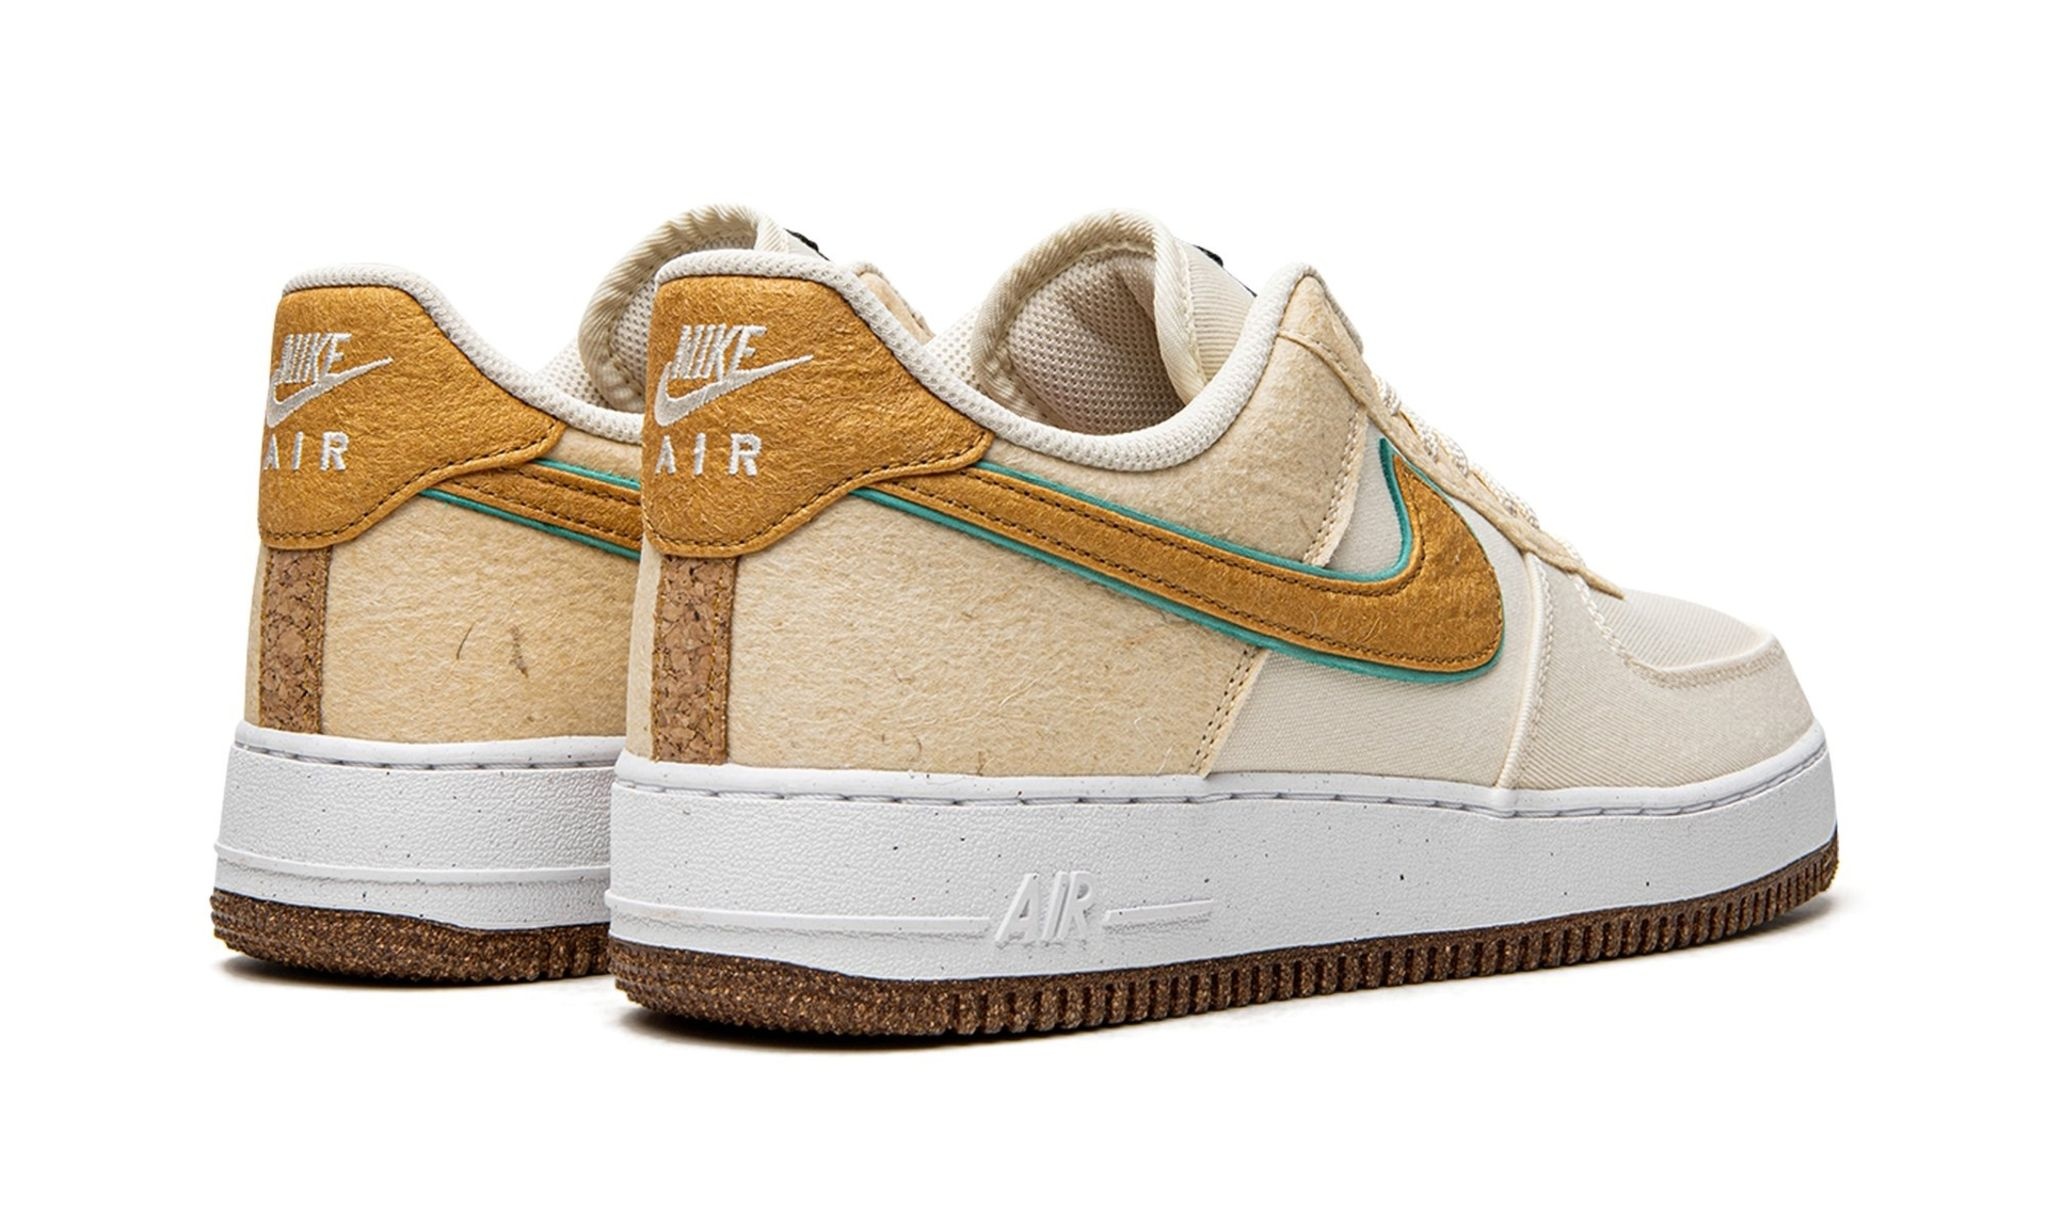 Air Force 1 '07 PRM "Happy Pineapple" - 3